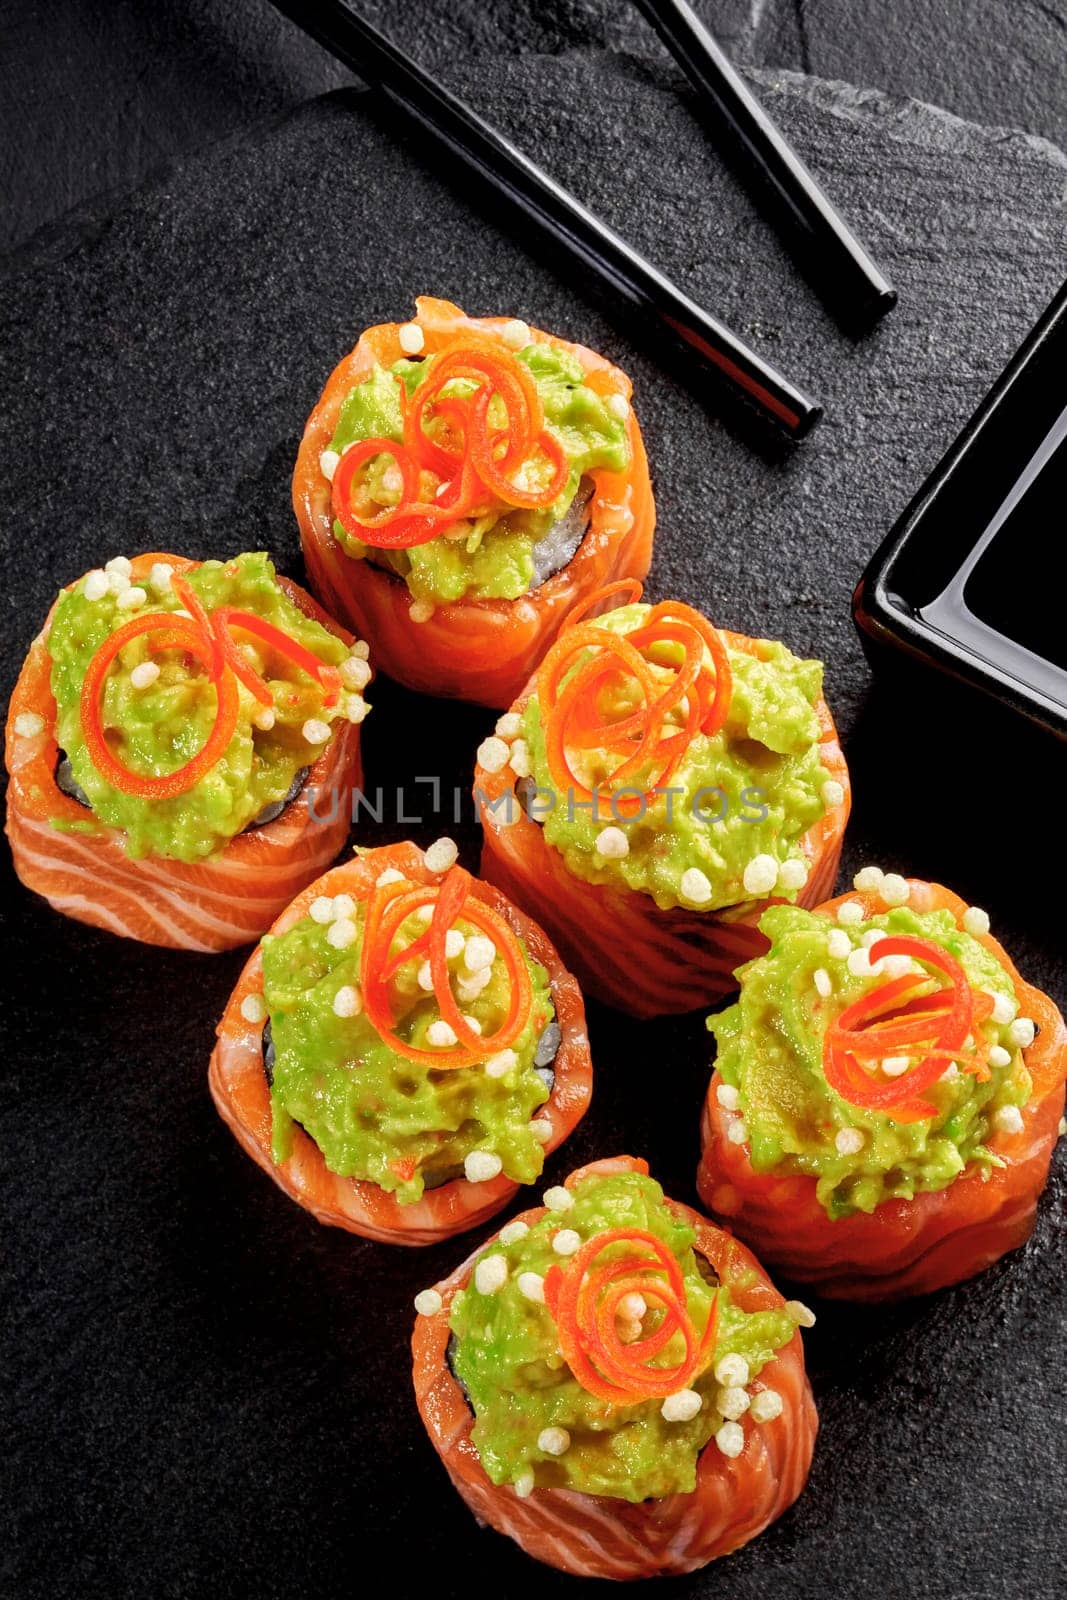 Artfully arranged salmon sushi topped with mashed avocado and delicate bell pepper curls, served on textured stone plate with soy sauce and chopsticks